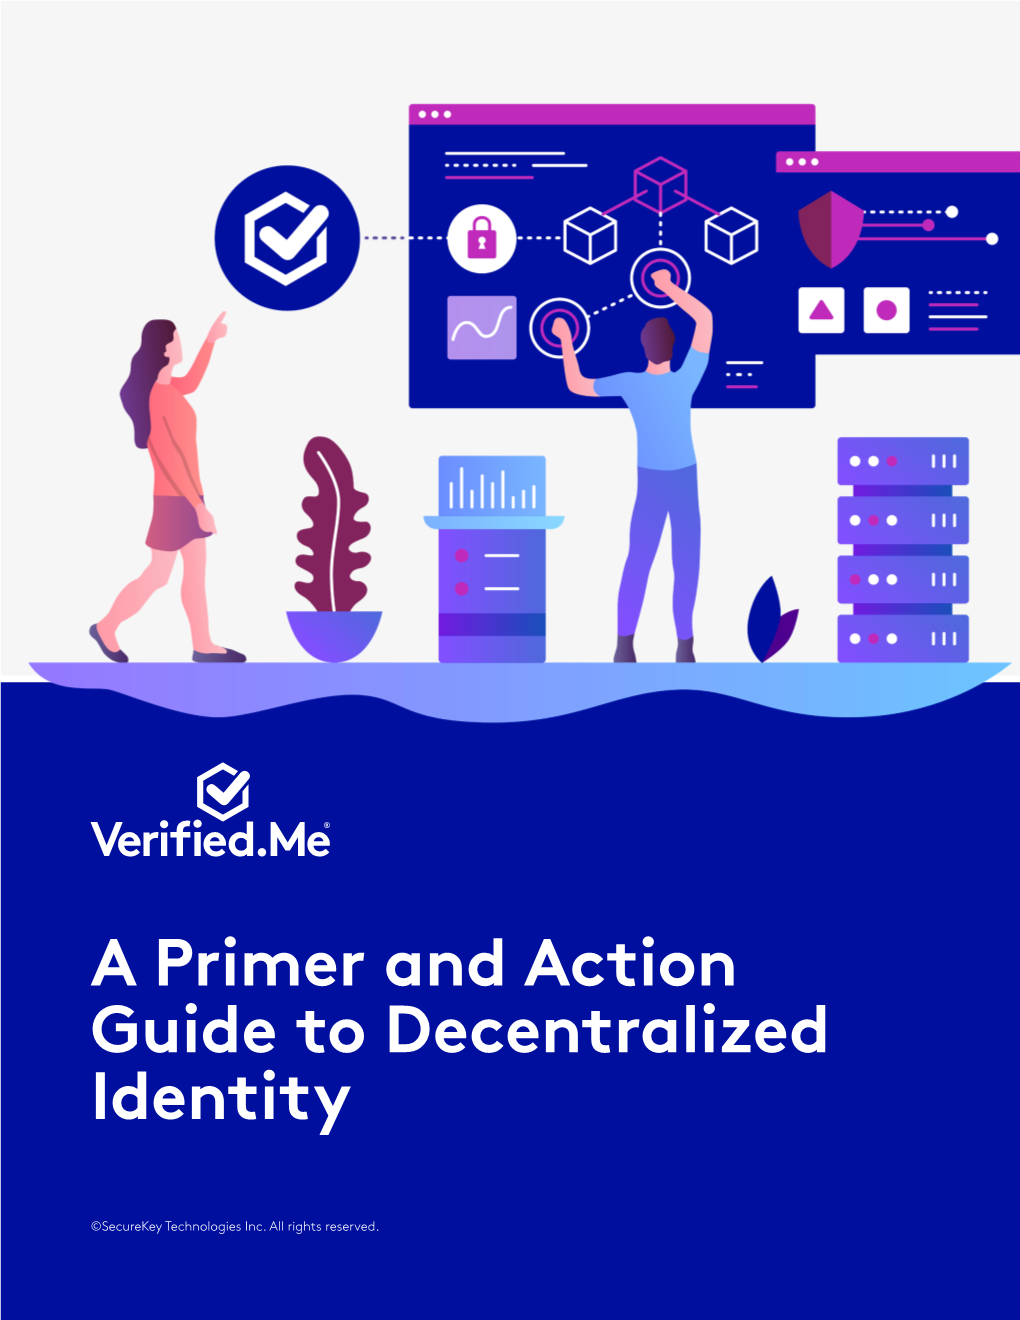 A Primer and Action Guide to Decentralized Identity